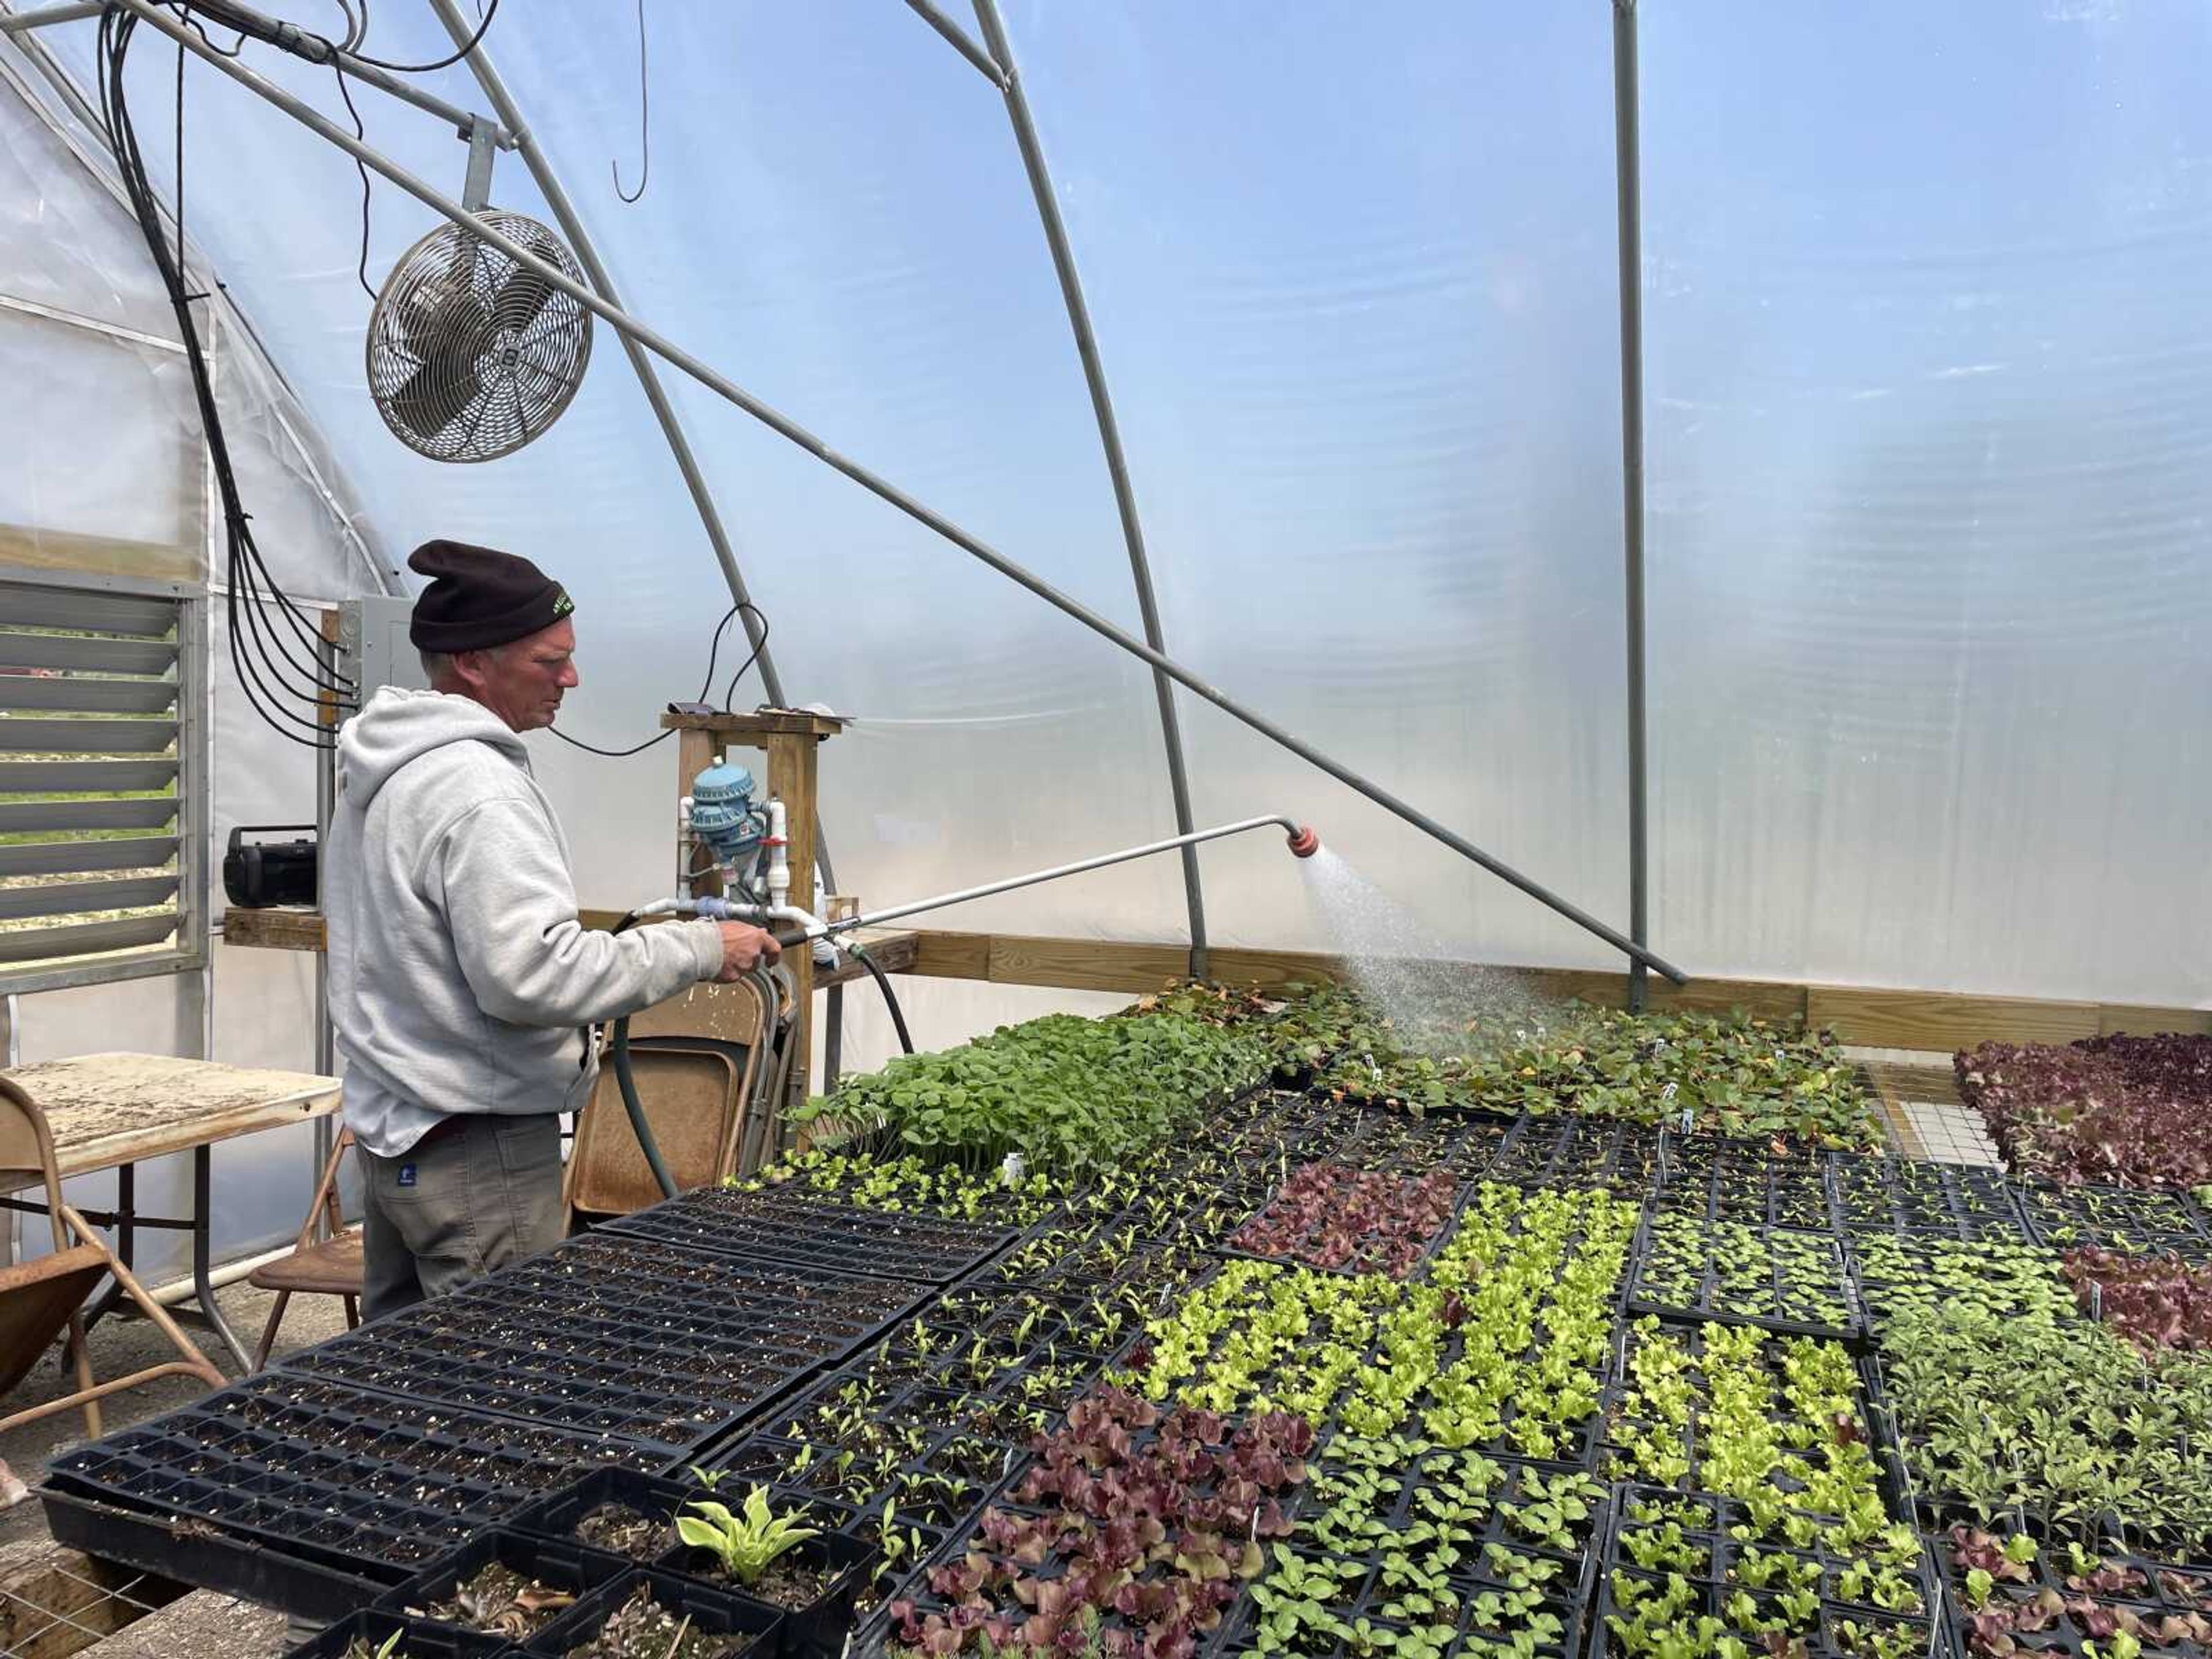 Kurt Sweitzer waters his produce plants in the greenhouse once a day. Watering is essential for plants in a humid environment. 